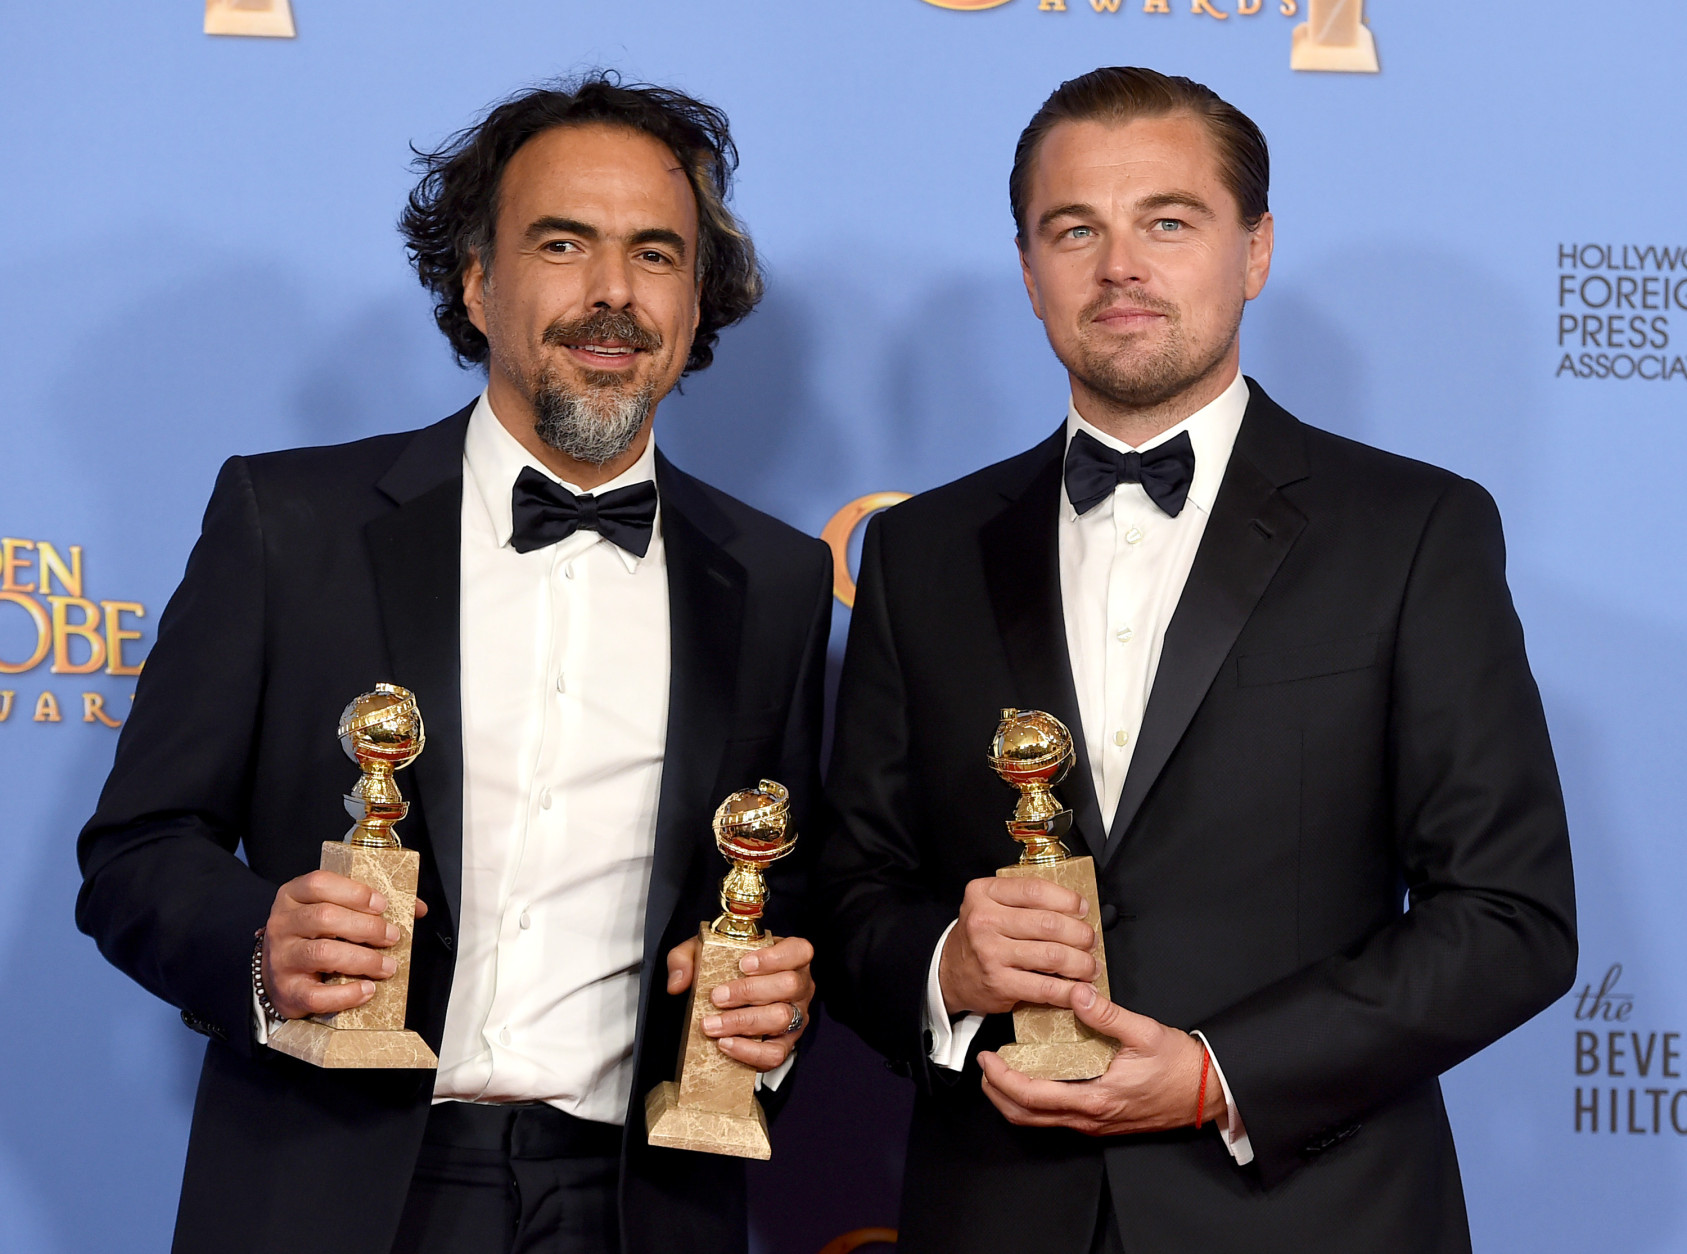 Alejandro Gonzalez Inarritu, left, and Leonardo DiCaprio pose in the press room with the award for best motion picture - drama for The Revenant at the 73rd annual Golden Globe Awards on Sunday, Jan. 10, 2016, at the Beverly Hilton Hotel in Beverly Hills, Calif. (Photo by Jordan Strauss/Invision/AP)